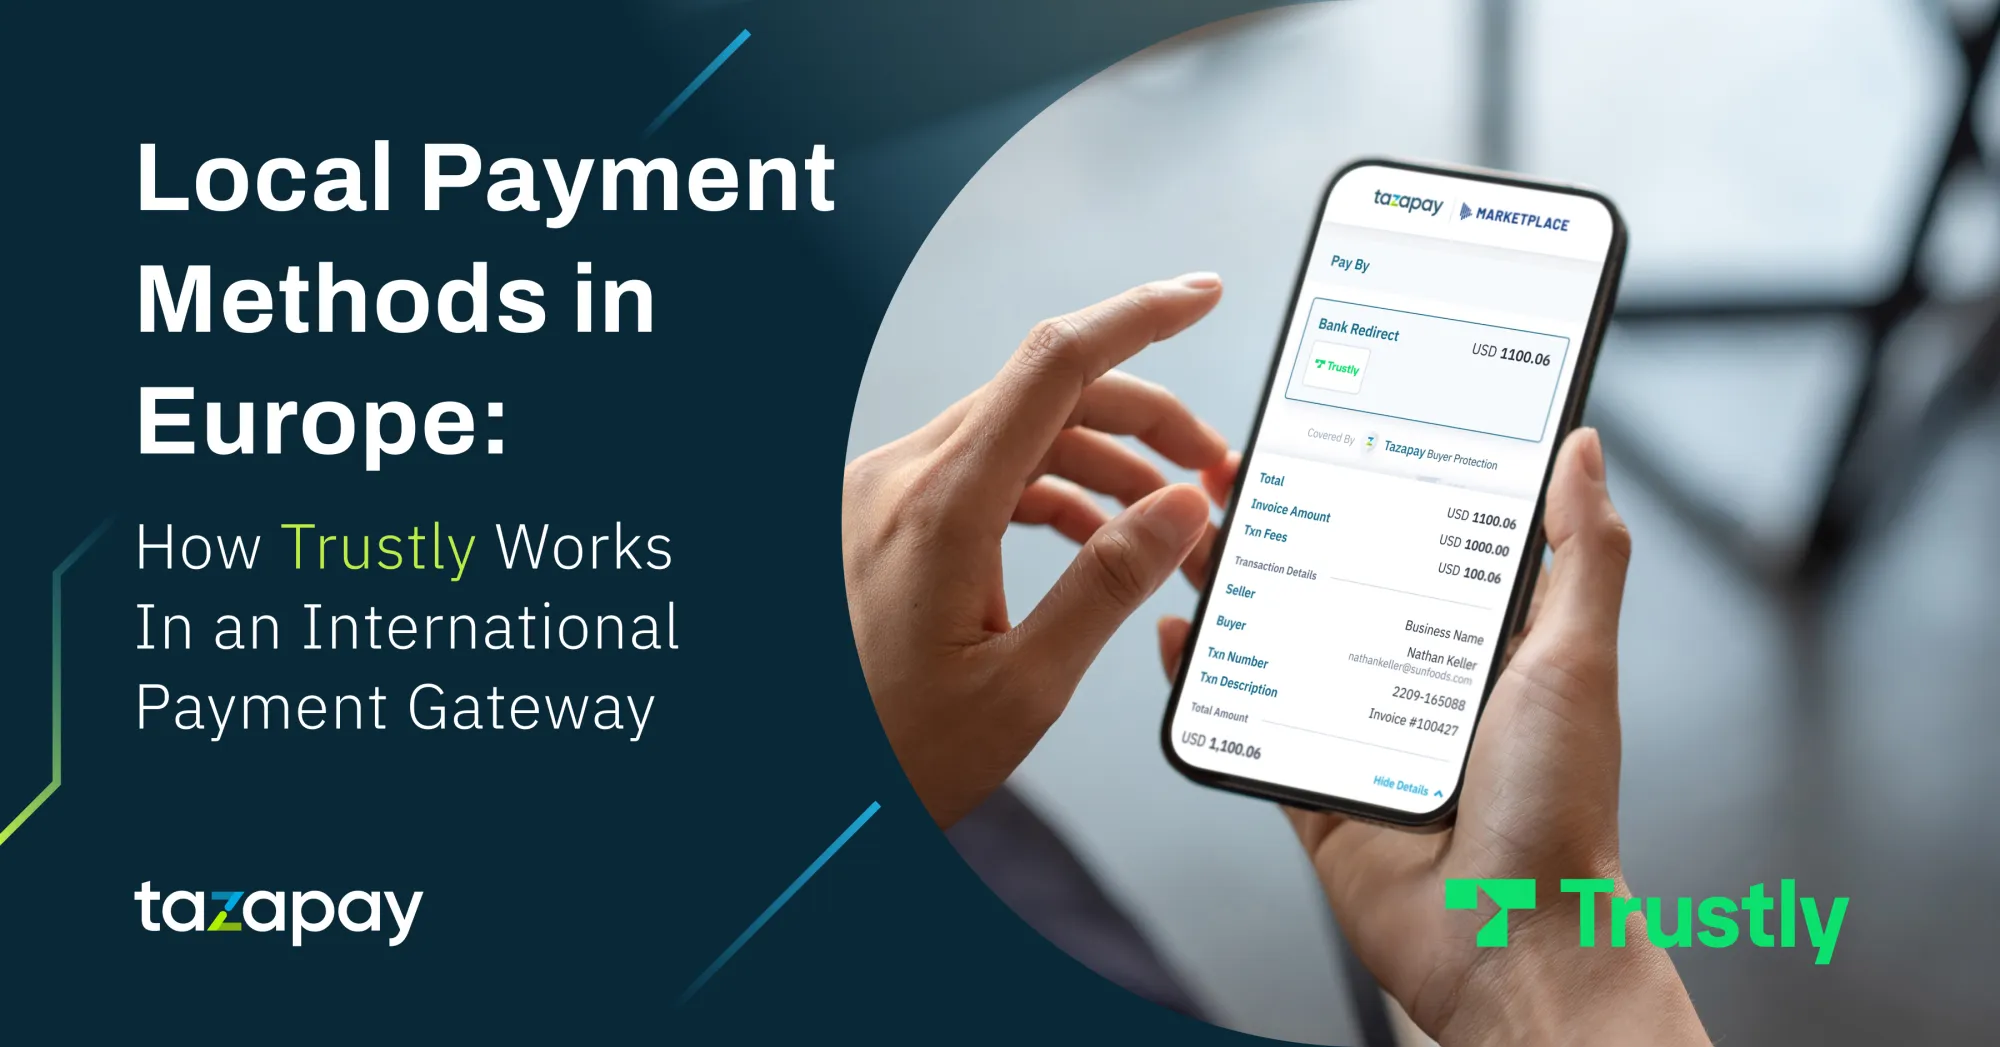 Local Payment Methods in Europe: How Trustly Works in an International Payment Gateway